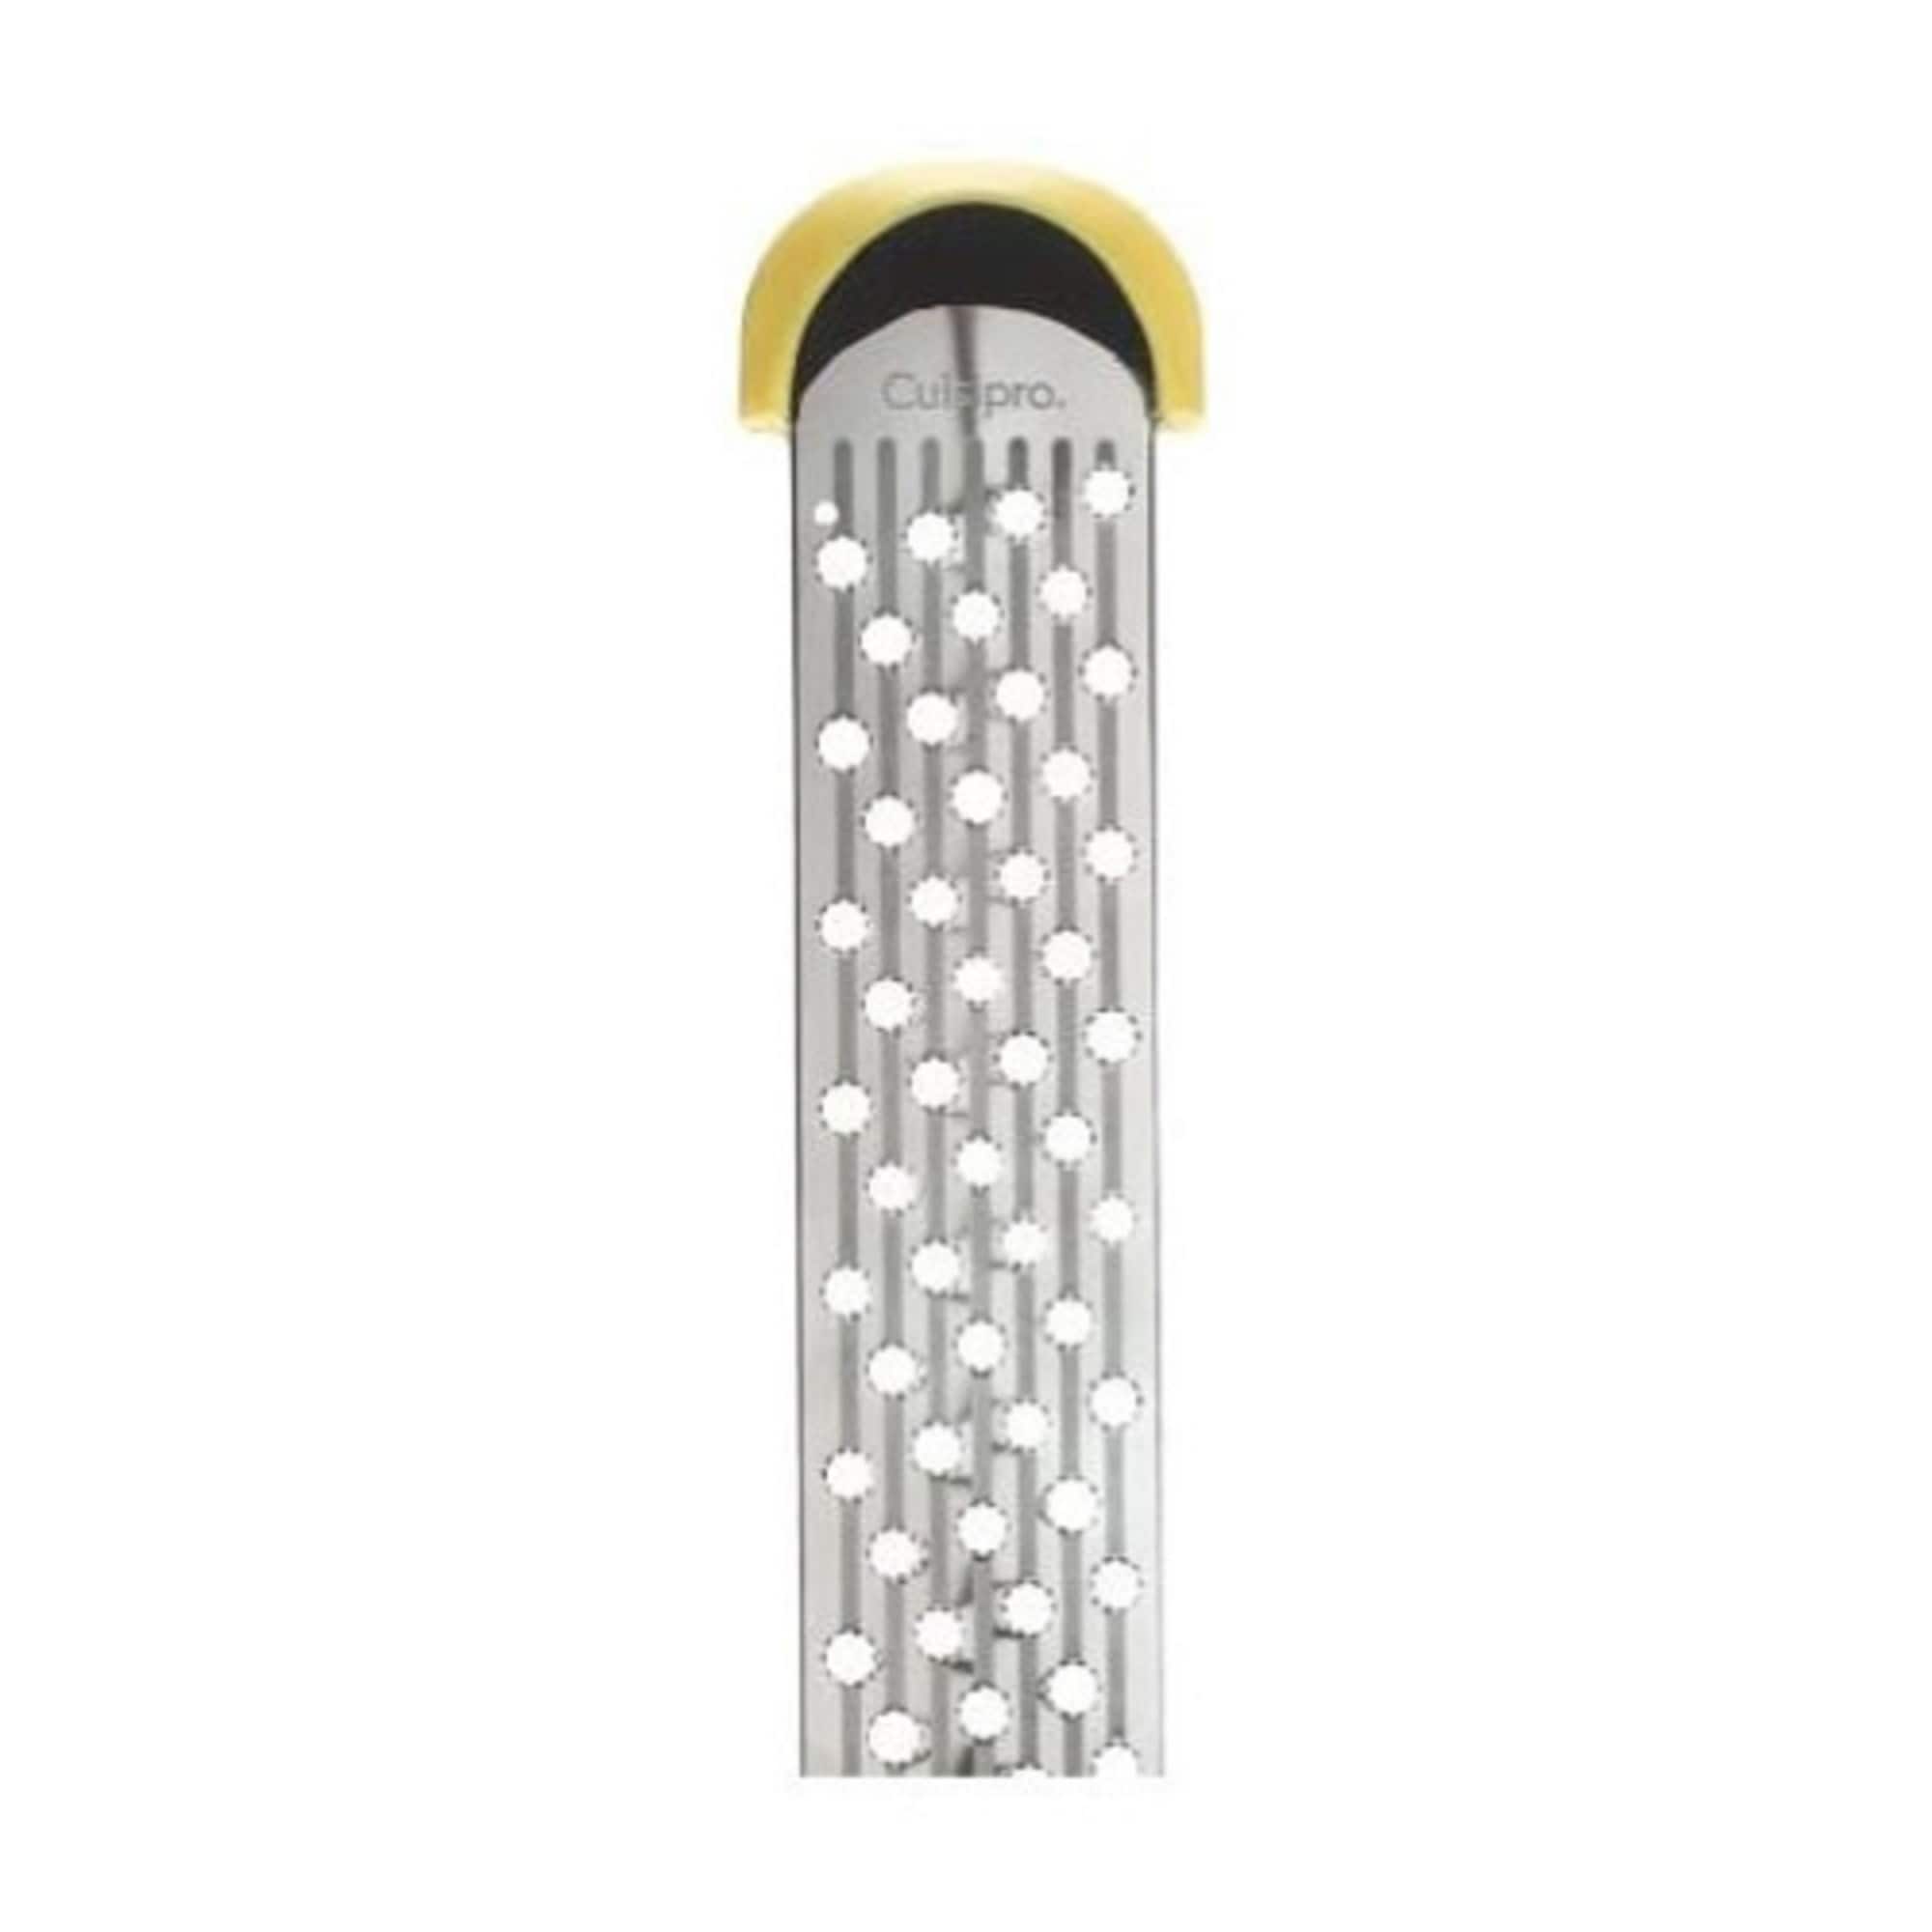 https://ak1.ostkcdn.com/images/products/is/images/direct/451ed55e8098ab7c0532f34971d48ca9db65b423/Cuisipro-Parmesan-Rasp-Grater-with-Surface-Glide-Technology.jpg